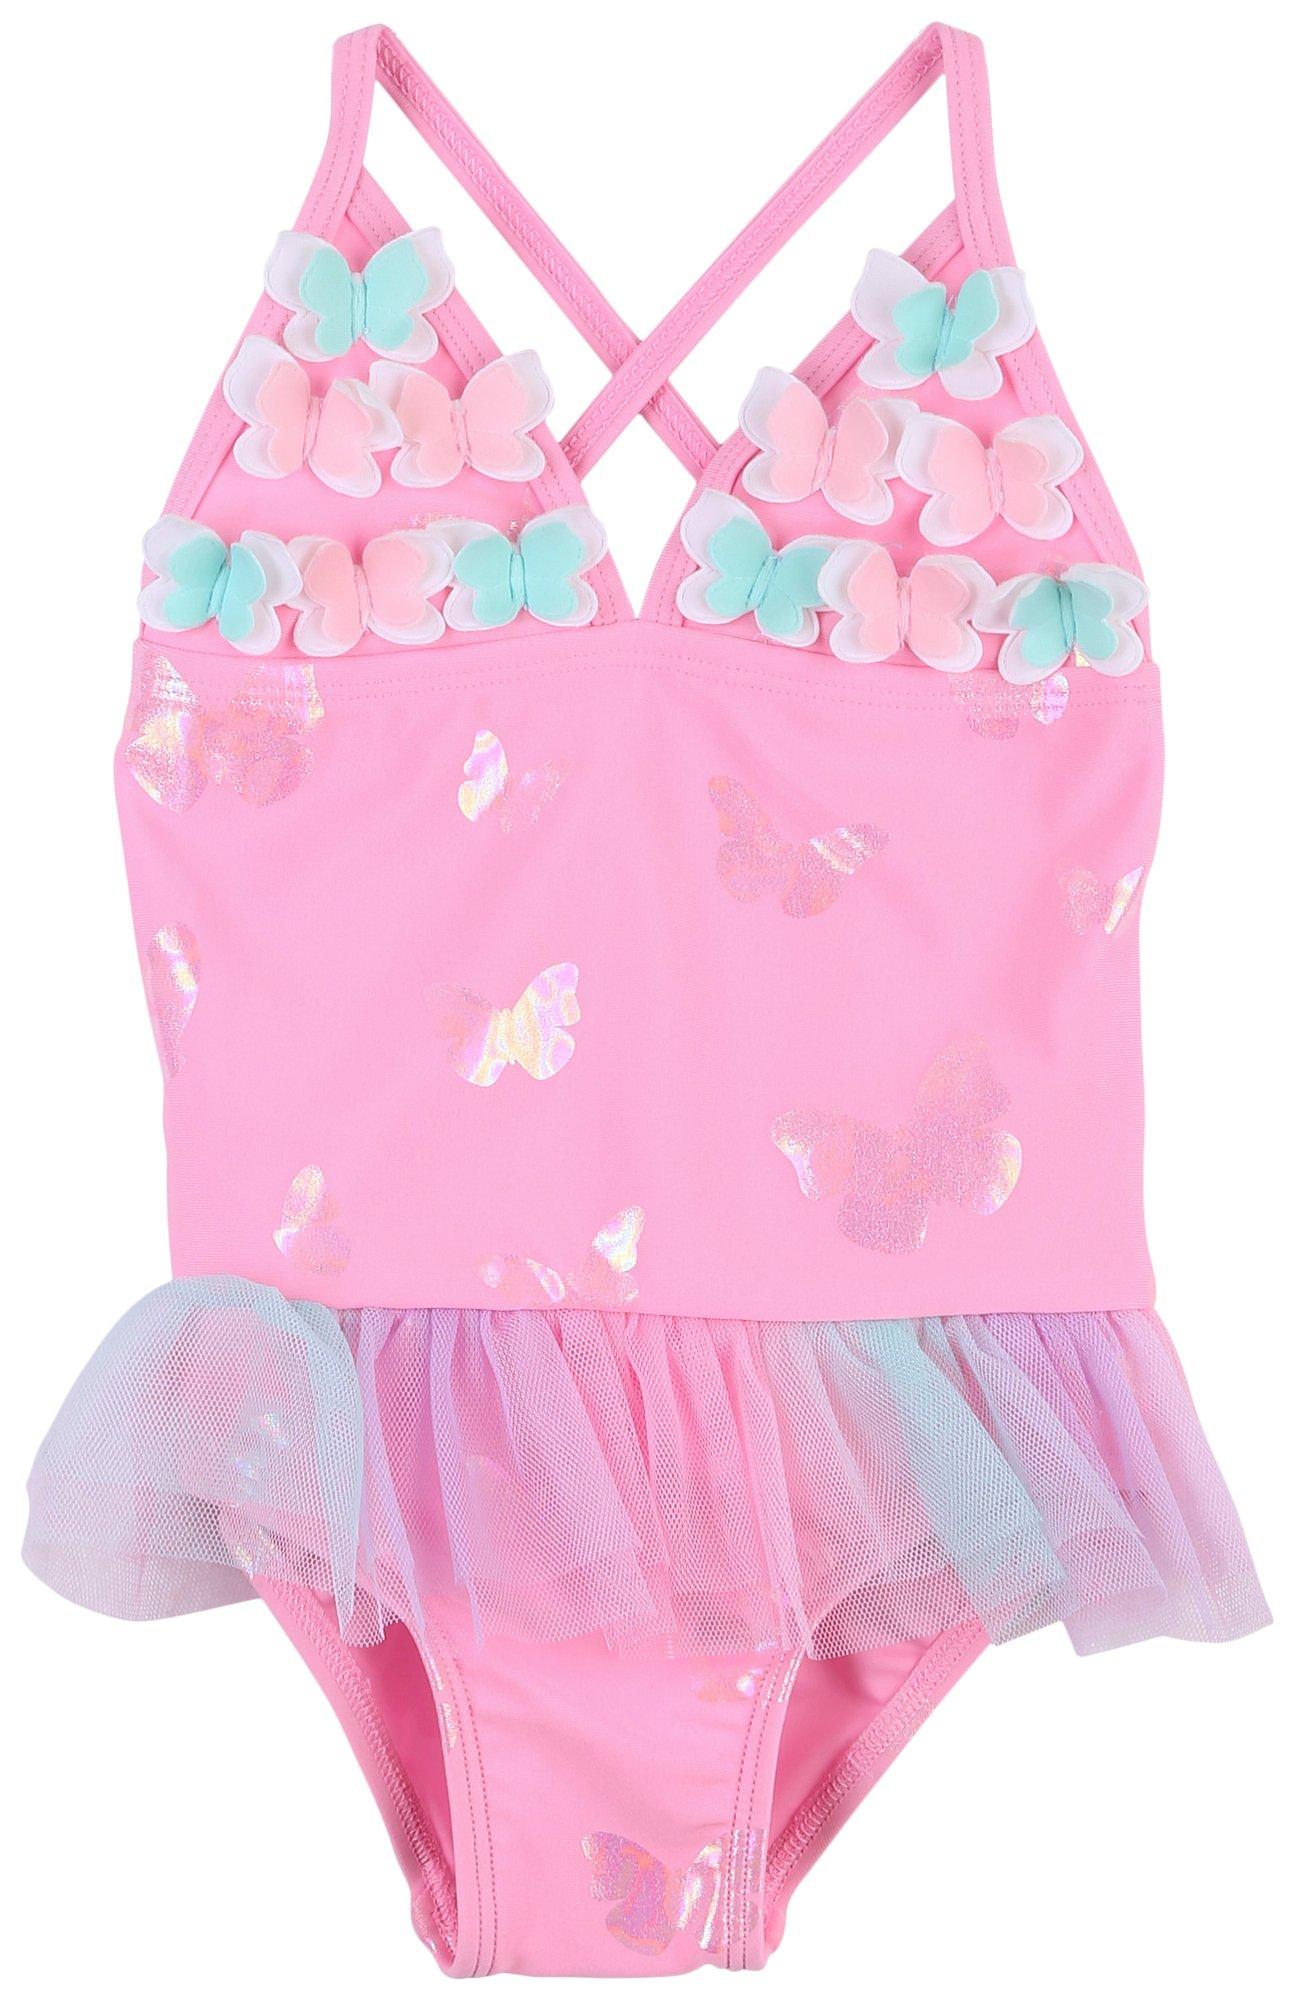 Toddler Girls One Pc. Pink Floral Swimsuit